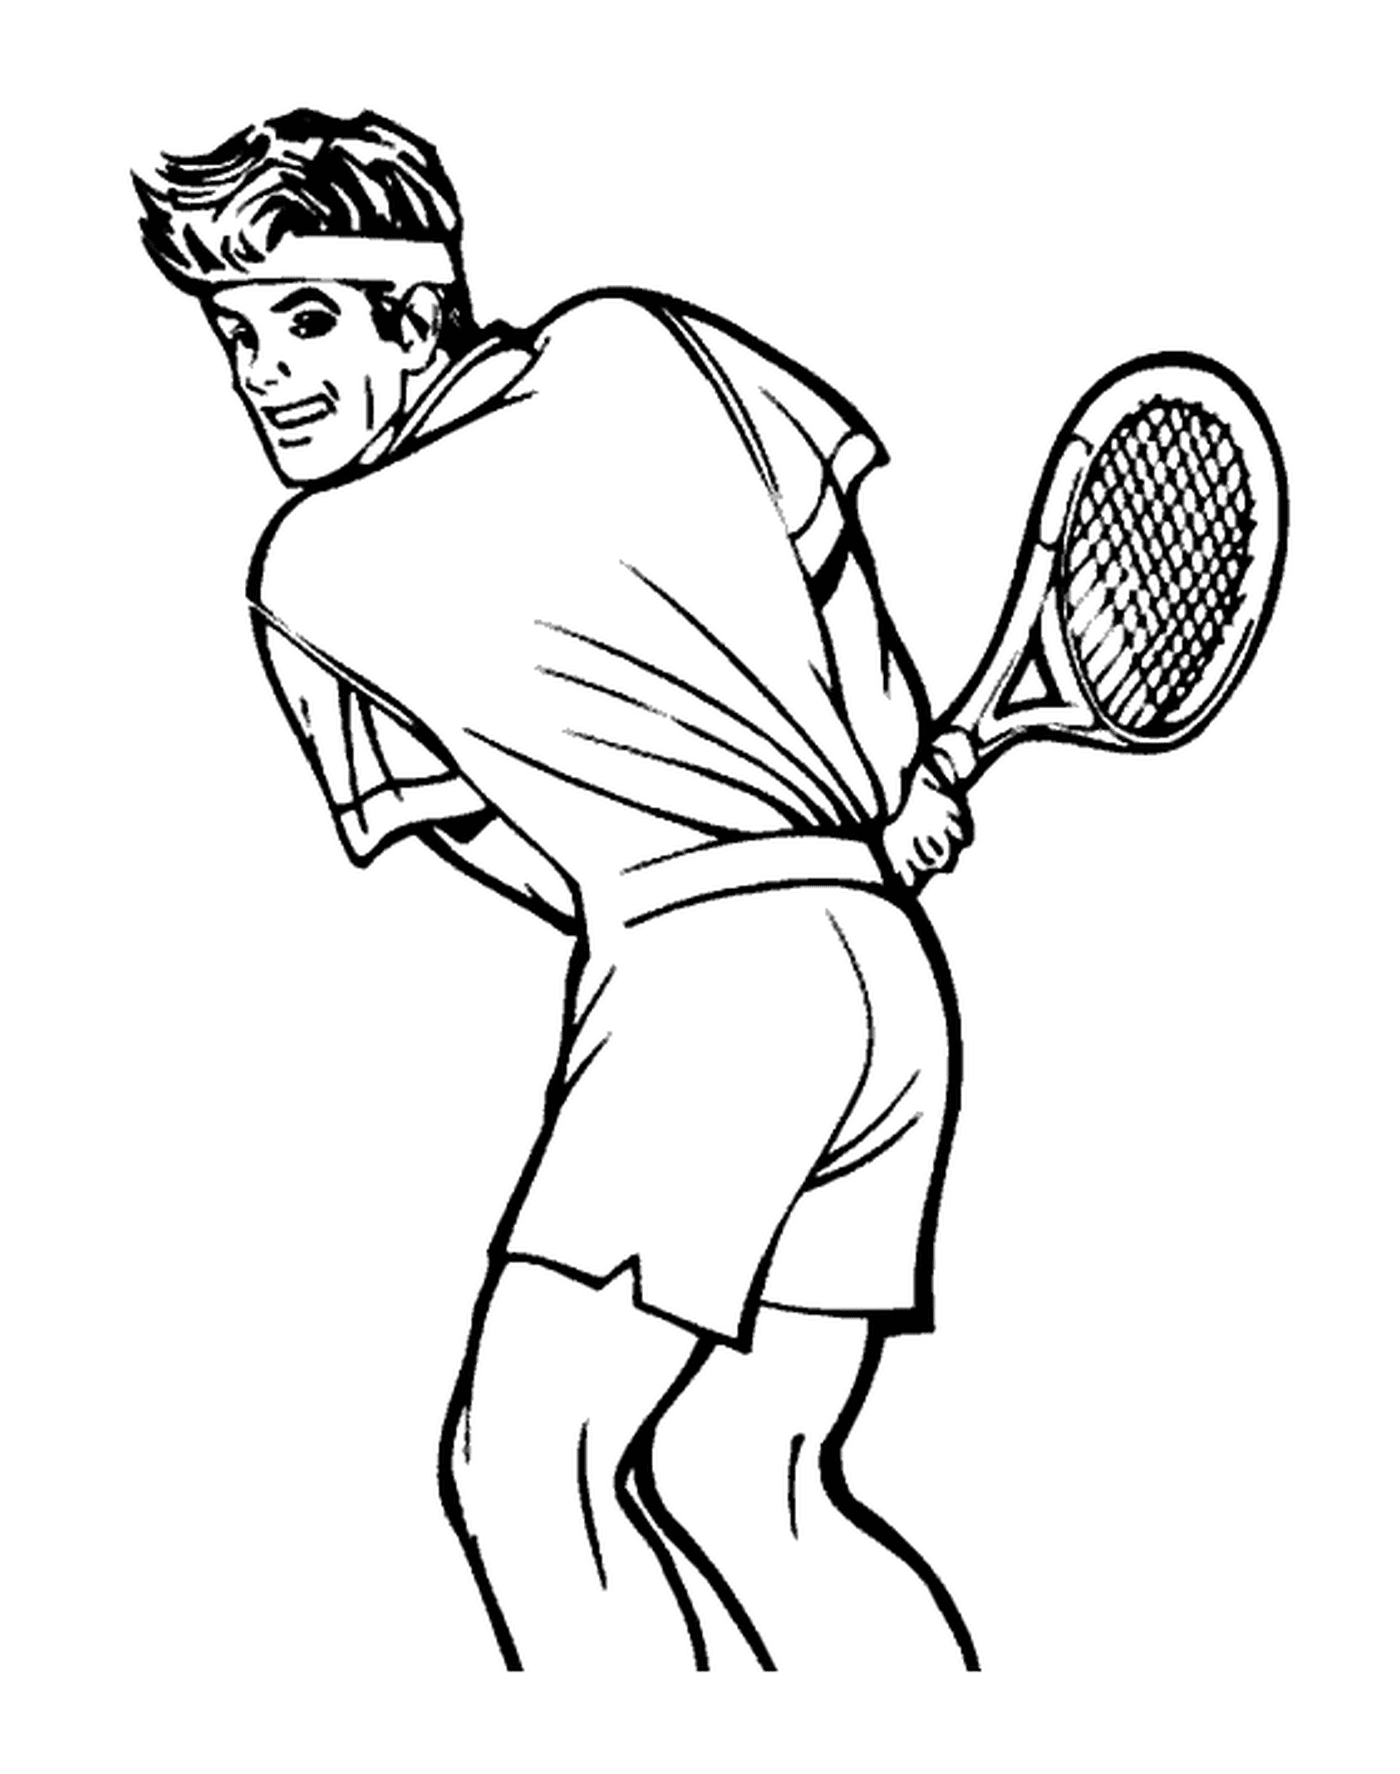  A tennis player on the court 